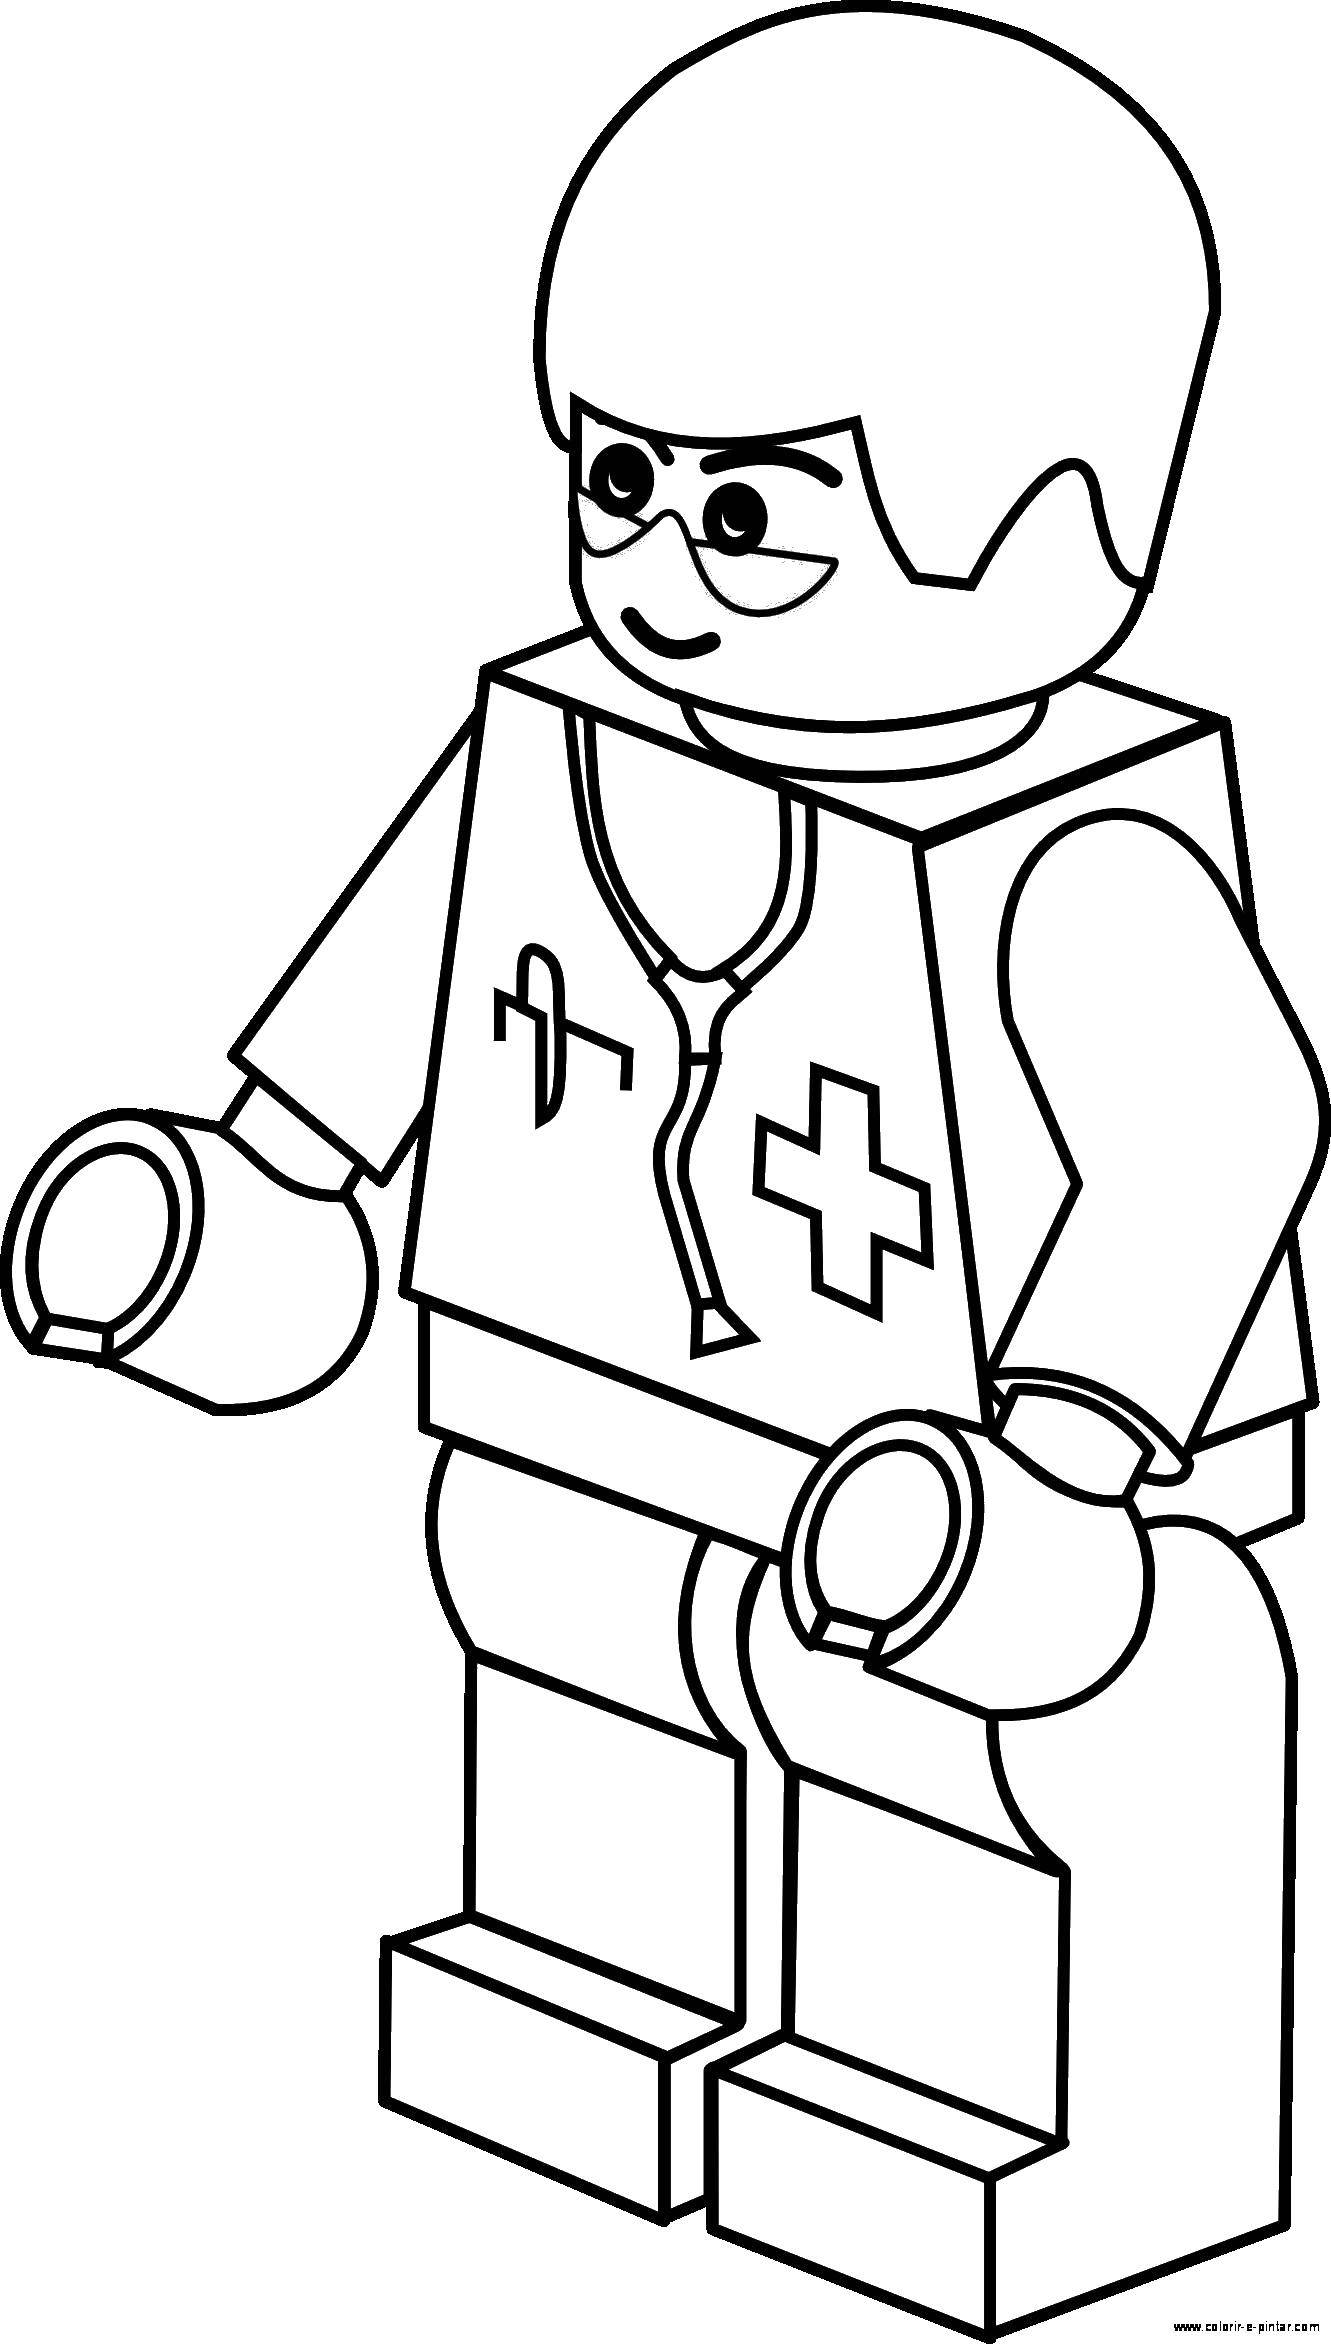 Coloring LEGO doctor. Category LEGO. Tags:  LEGO, doctor.